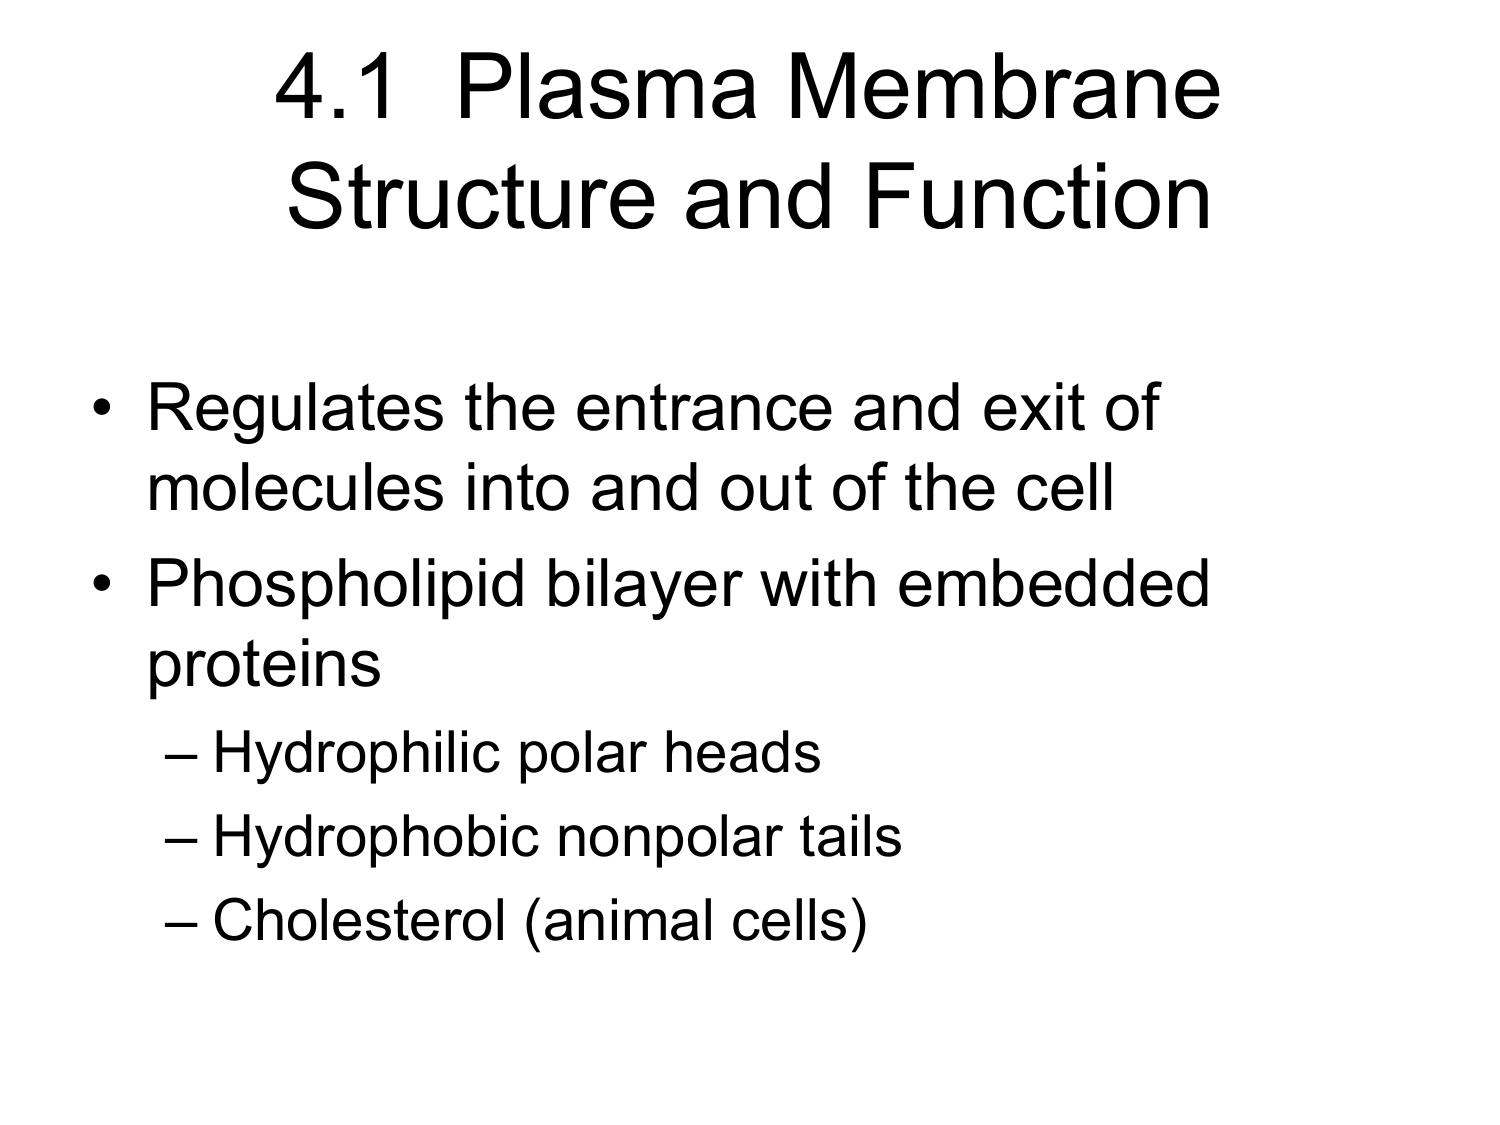  Plasma Membrane Structure and Function